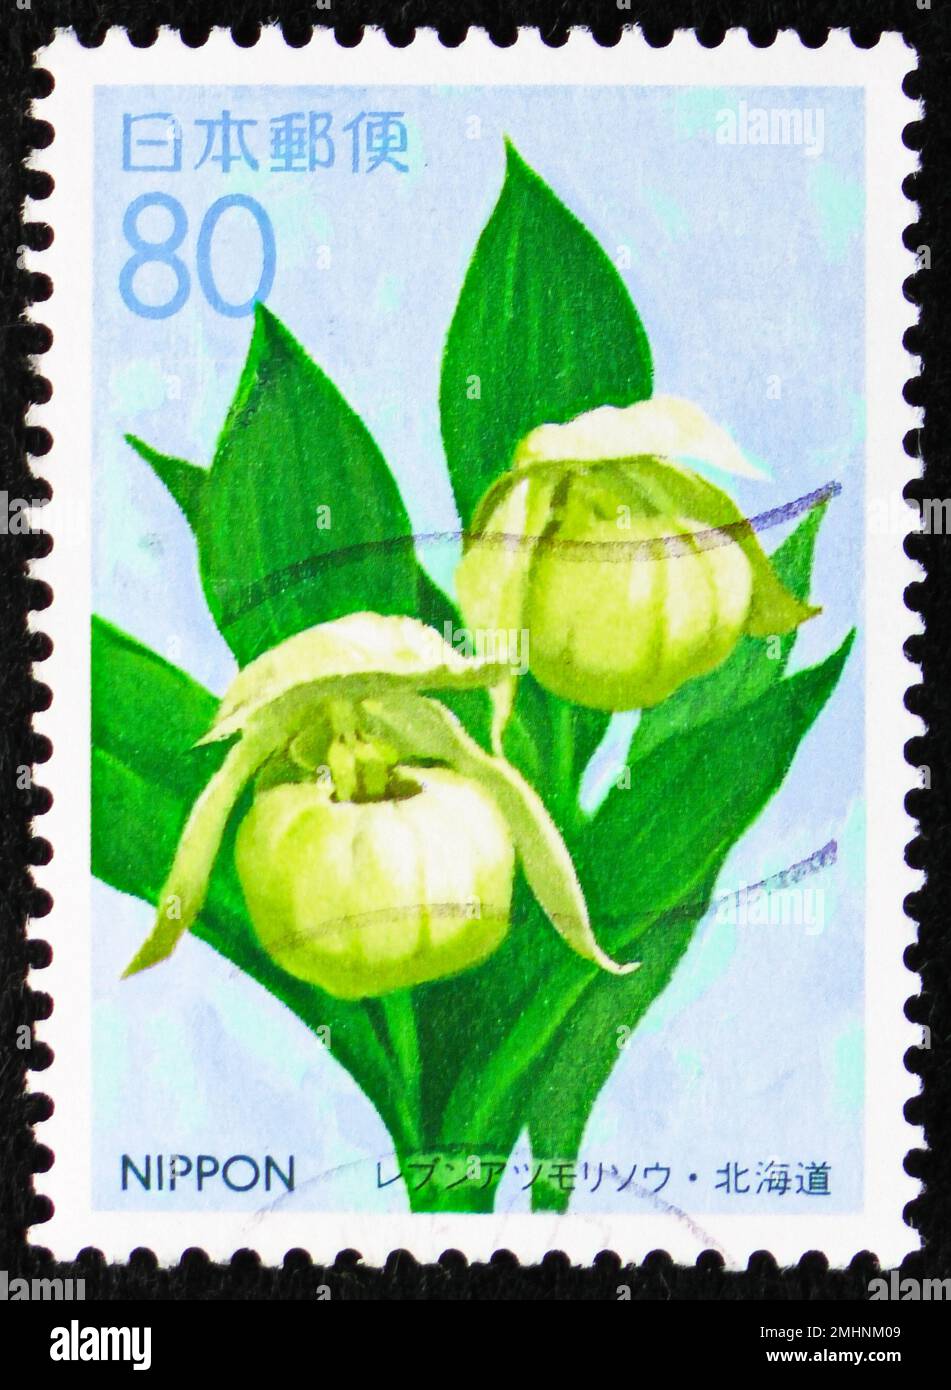 MOSCOW, RUSSIA - DECEMBER 25, 2022: Postage stamp printed in Japan shows Lady's Slipper of Rebun Orchid (Cypripedium macranthum), Prefecture Stamps - Stock Photo